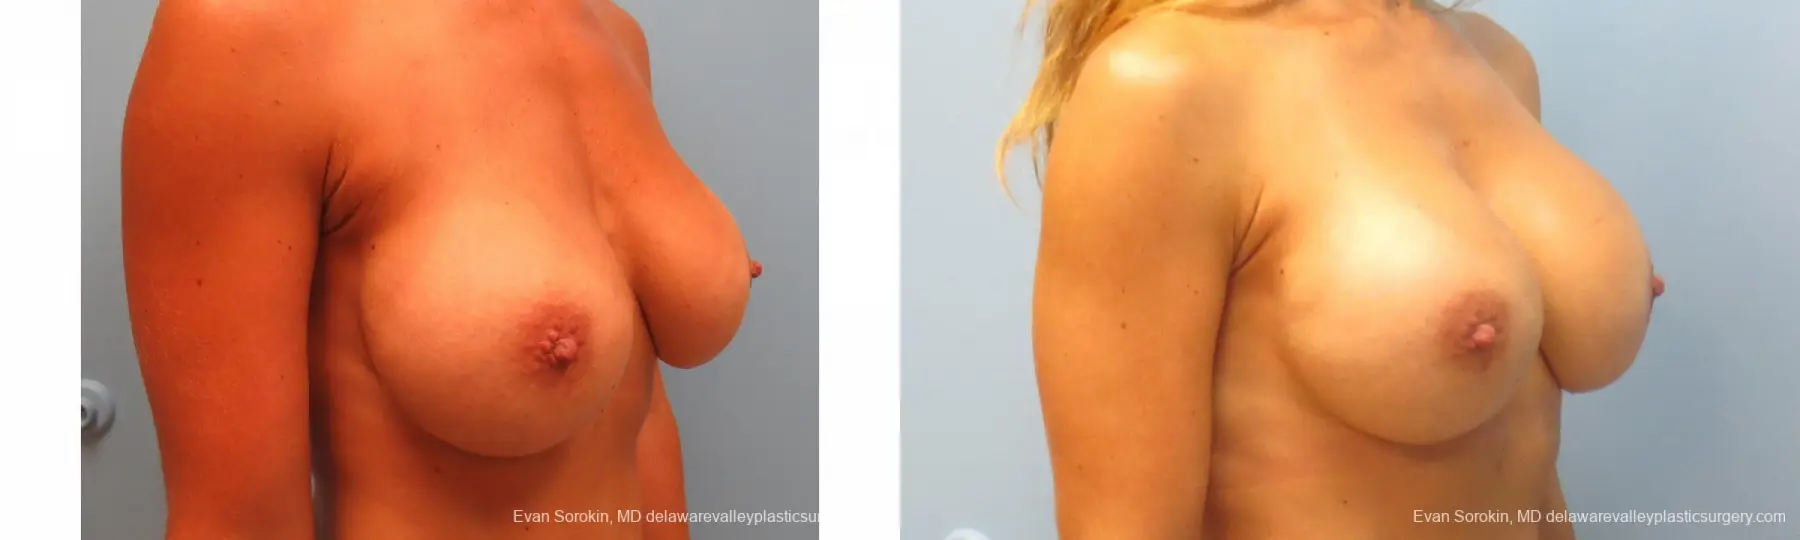 Breast Augmentation Revision: Patient 10 - Before and After 4